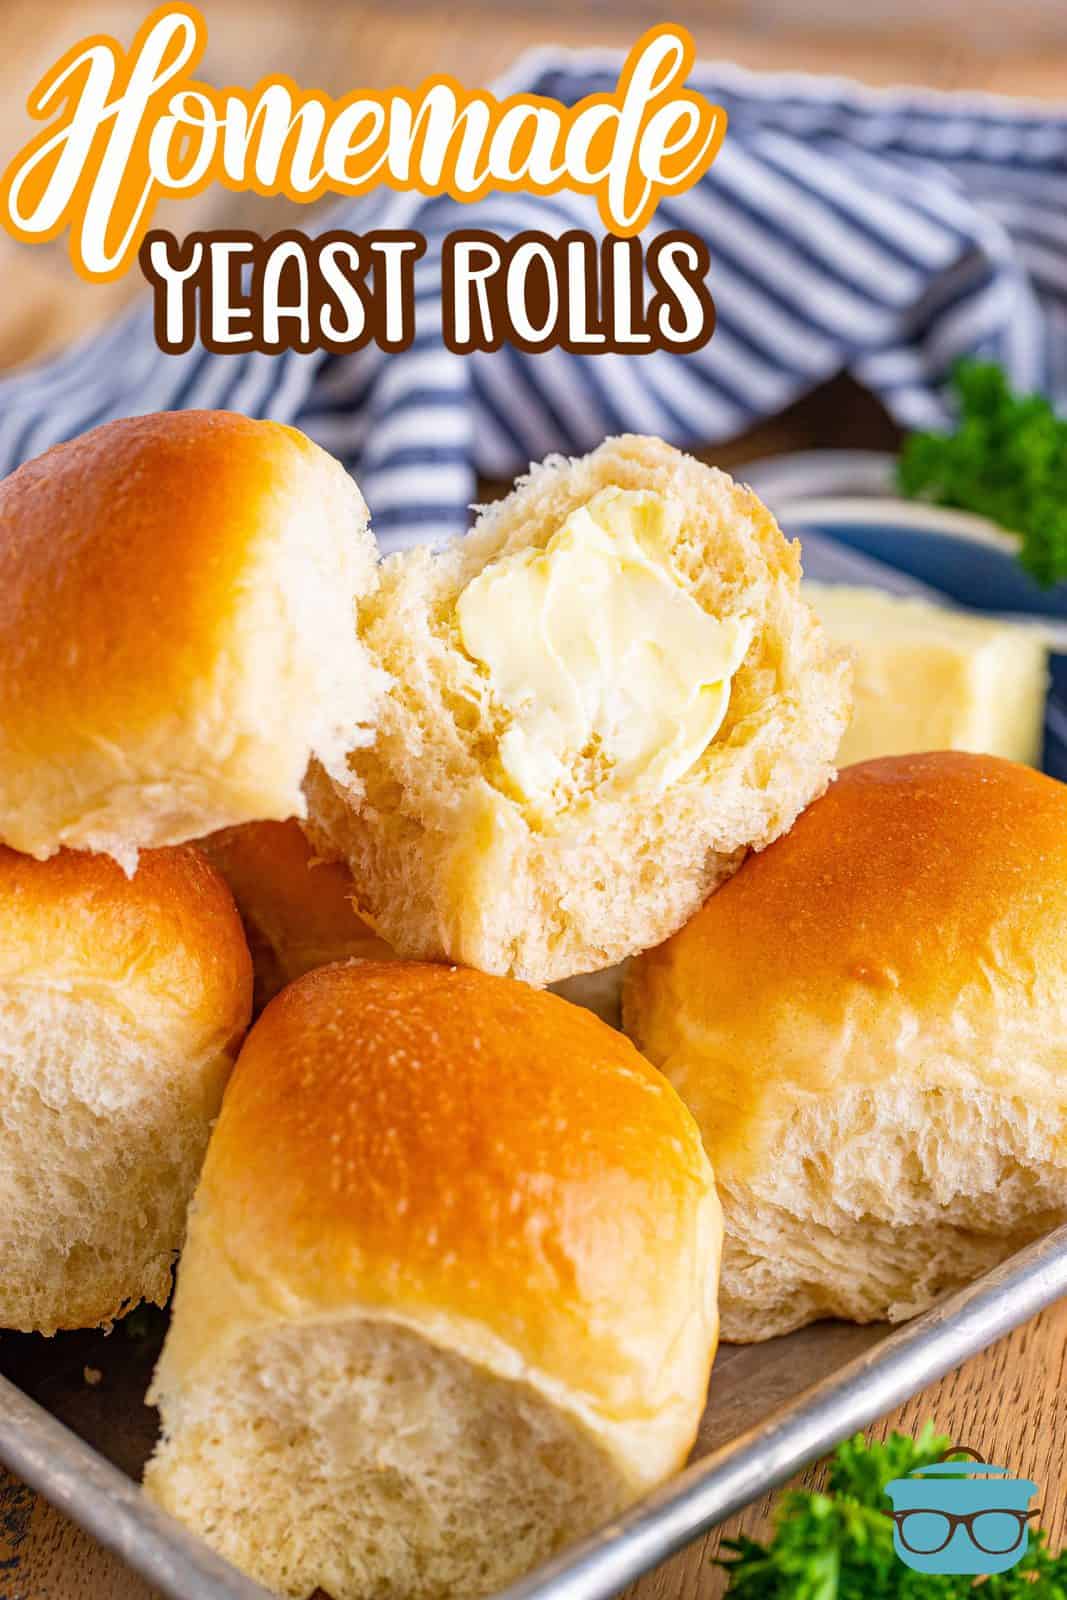 Pinterest image of Homemade Yeast Rolls on tray with one cut open spread with butter.